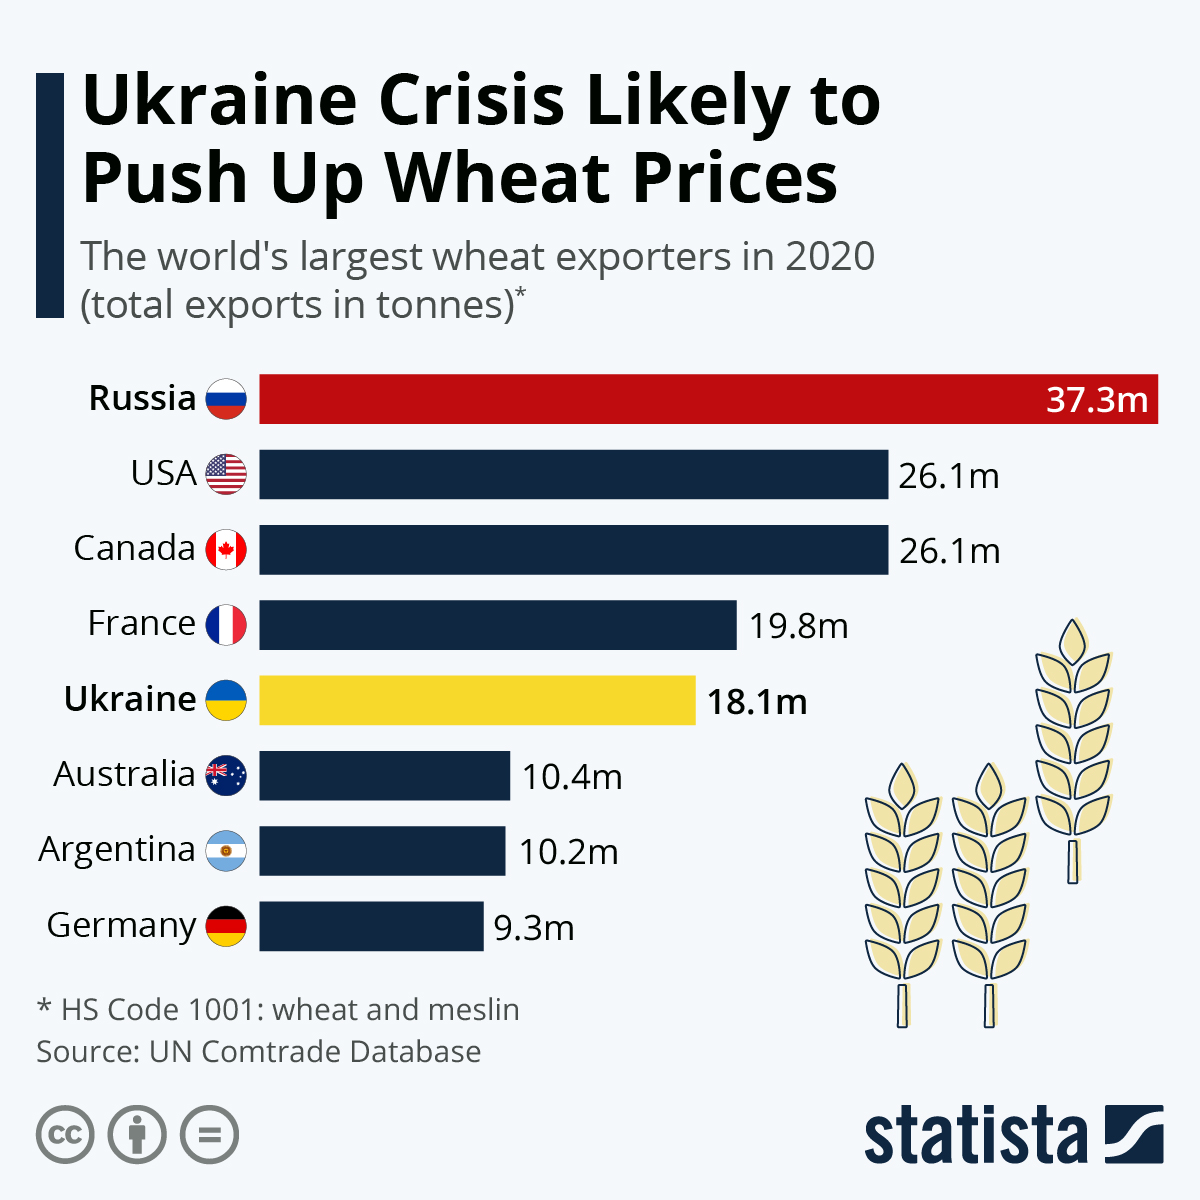 Ukraine Crisis Likely to Push Up Wheat Prices